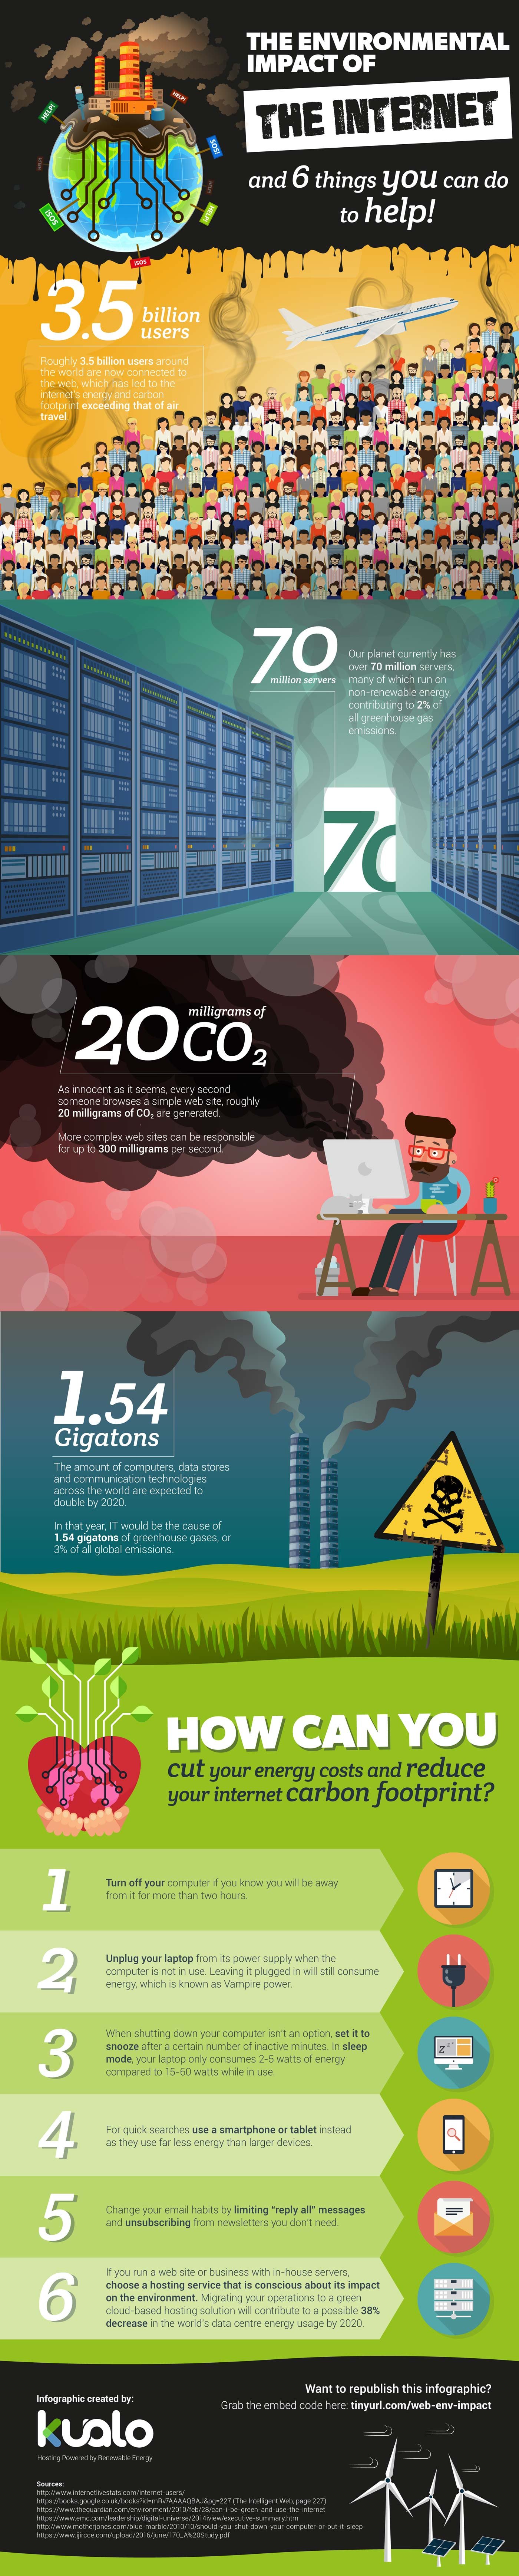 The Environmental Impact of the Internet